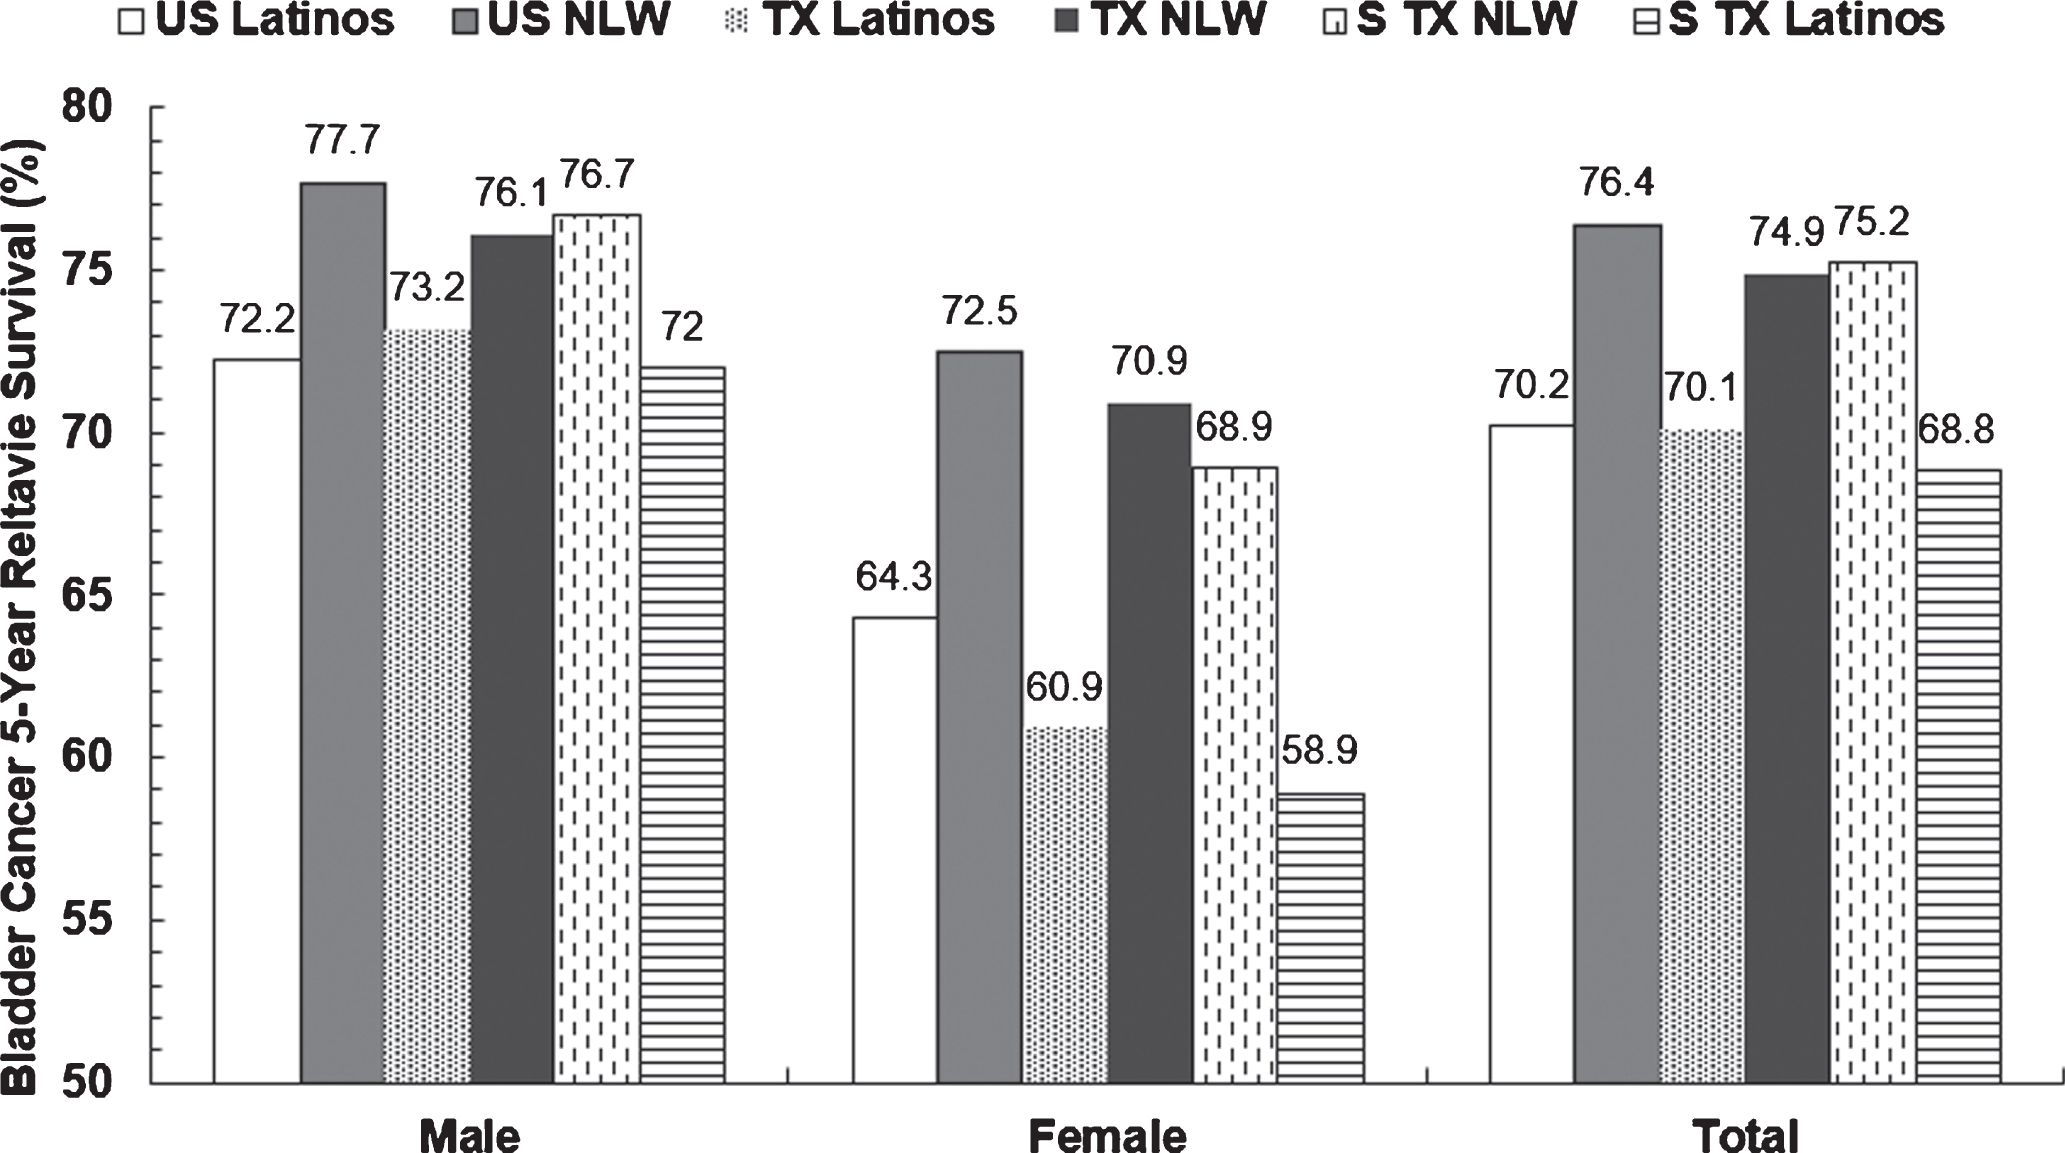 5-Year relative survival rates of bladder cancer in Latinos and non-Latino whites from US SEER and Texas and South Texas, 1995– 2015a. aP values <0.05 for the below comparisons: all NLW vs. Latino groups regardless of gender and race/ethnicity, all men vs. women regardless of race/ethnicity and geography, TX vs. US SEER NLW men, TX vs. US SEER NLW women, TX vs. US SEER NLW men and women, STX vs. US SEER NLW women, STX vs. US SEER Latino women; P values >0.05 for the below comparisons: STX vs. US SEER NLW men, STX vs. US SEER NLW men and women, TX vs. US SEER Latino men, TX vs. US SEER Latino women, TX vs. US SEER Latino men and women, STX vs. US SEER Latino men, and STX vs. US SEER Latino men and women. NLW: non-Latino whites; STX: South Texas; TX: Texas; US SEER: United States Surveillance, Epidemiology, and End Results Program.